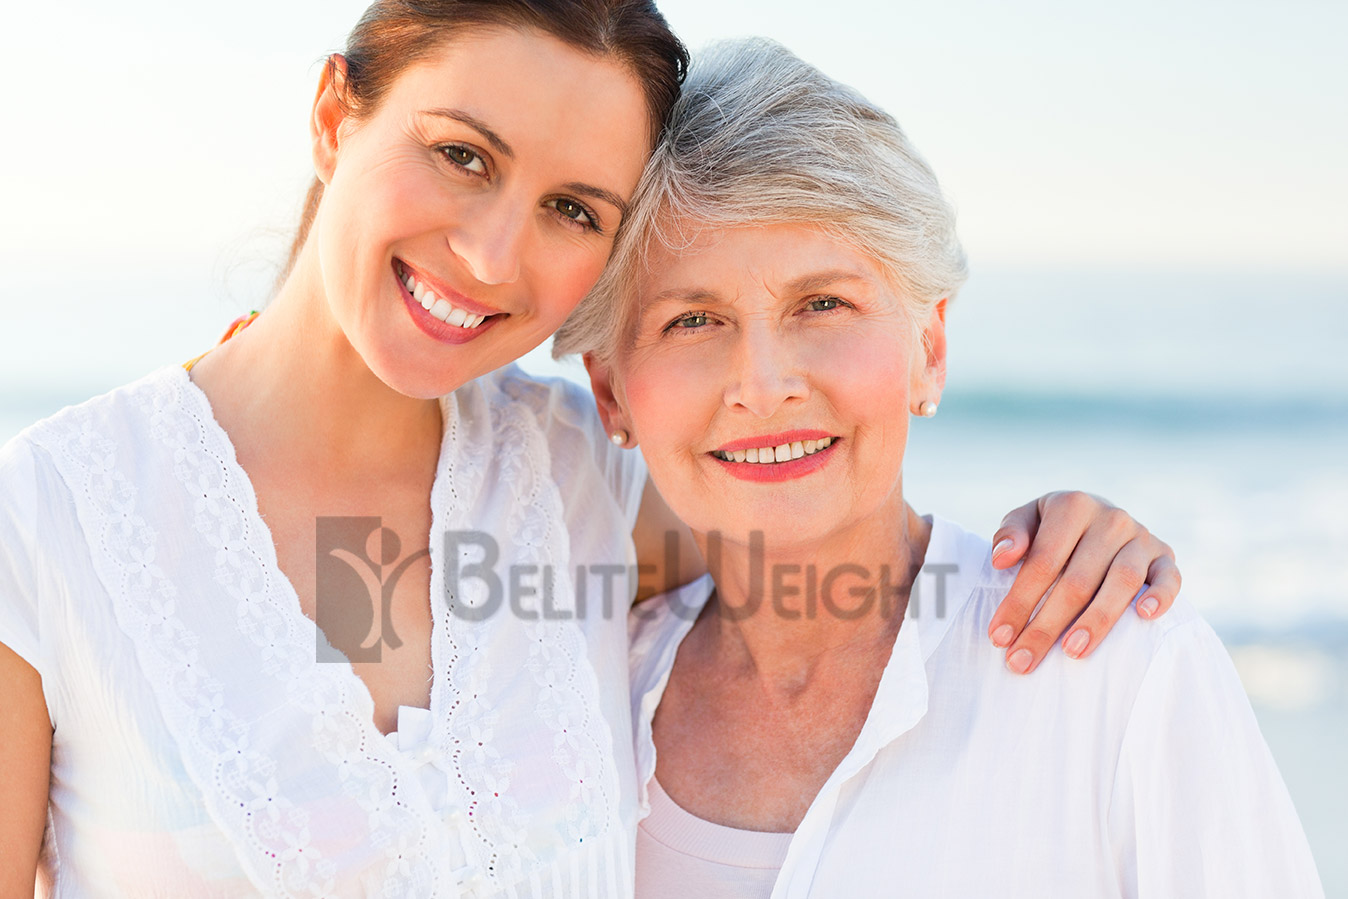 The Mother Daughter Health Connection